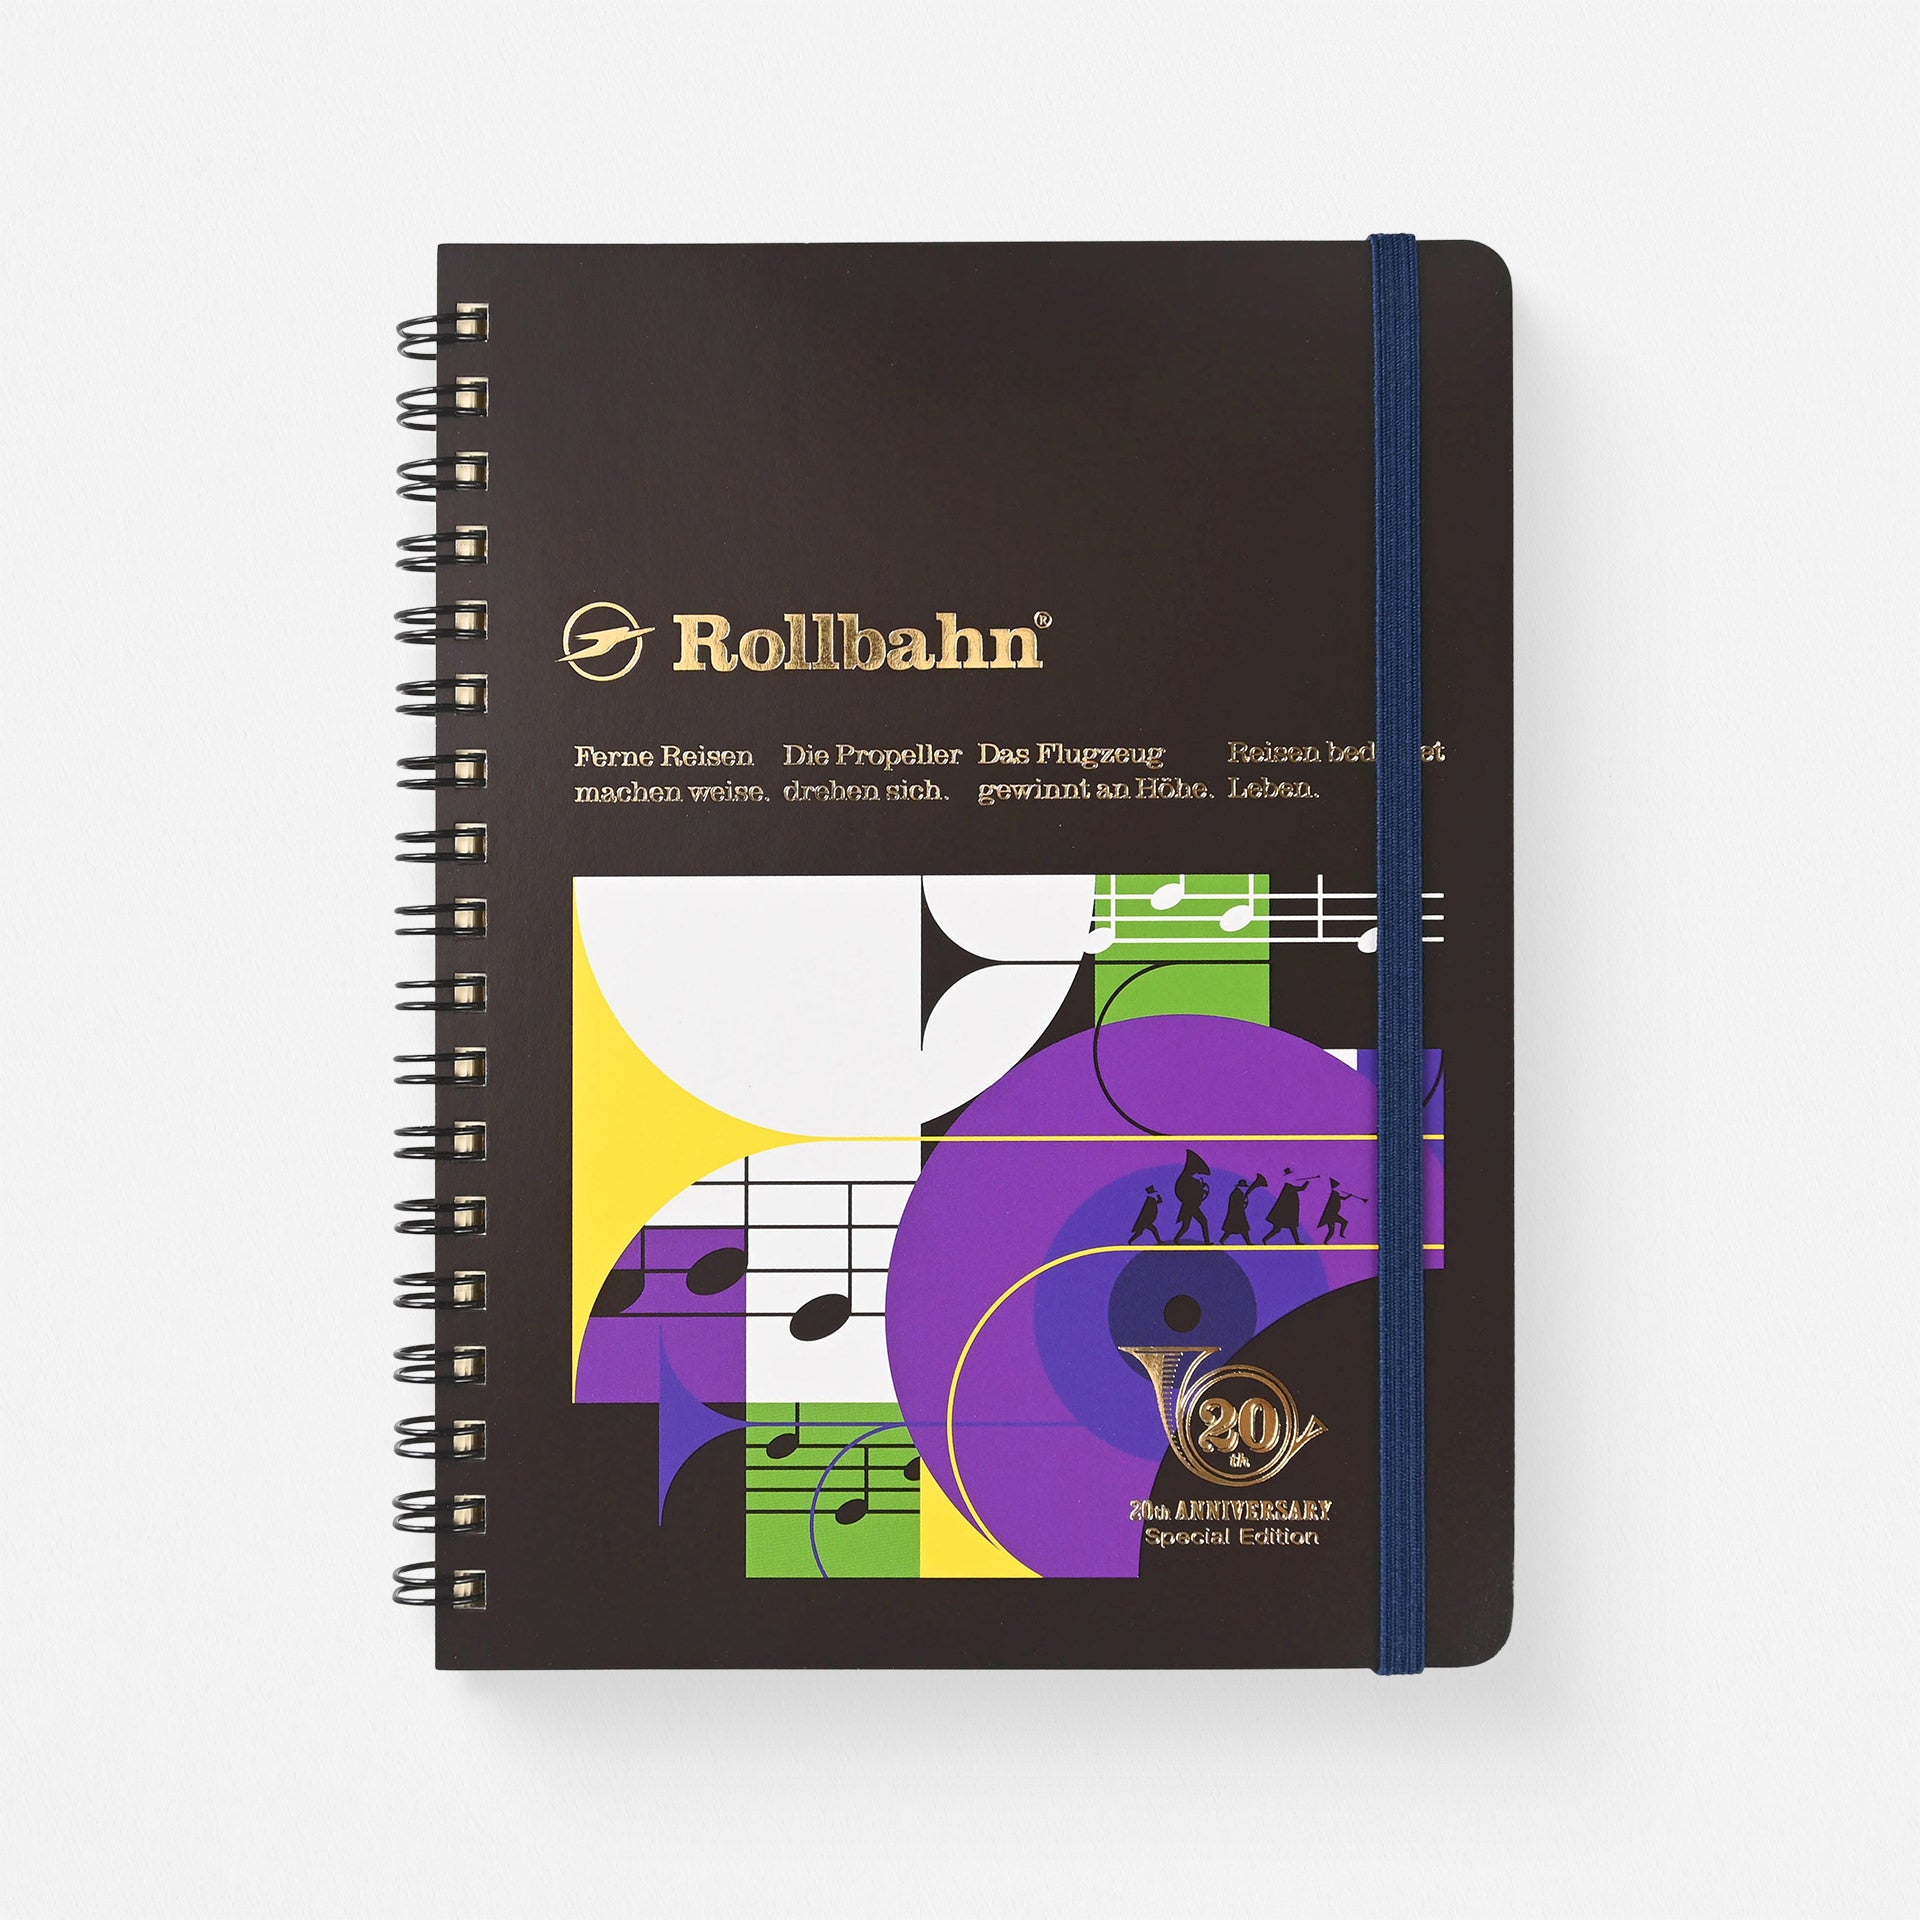 Delfonics Rollbahn Parade  Limited Edition 20th Anniversary Notebook "Music" 